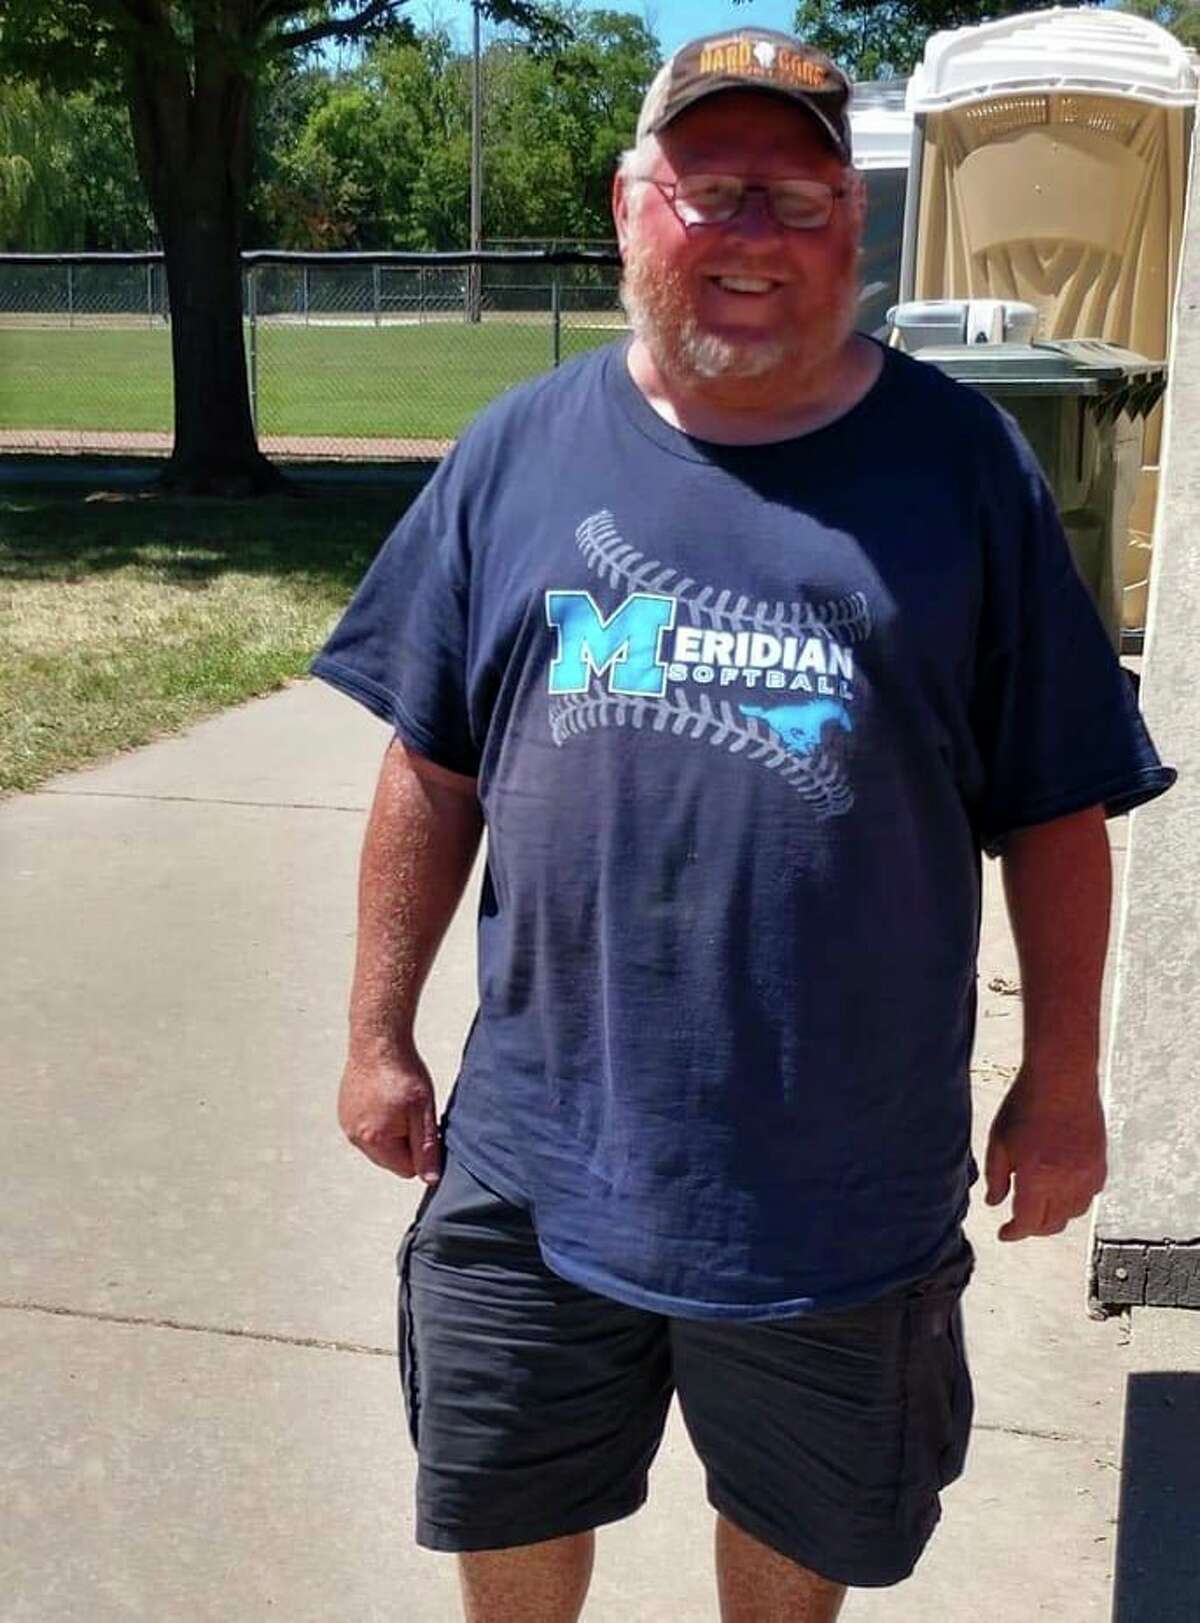 Johnny Thorington is described as a graceful, humble man who would do anything to support Meridian students. The bus driver currently is hospitalized with COVID-19. (Photo provided)